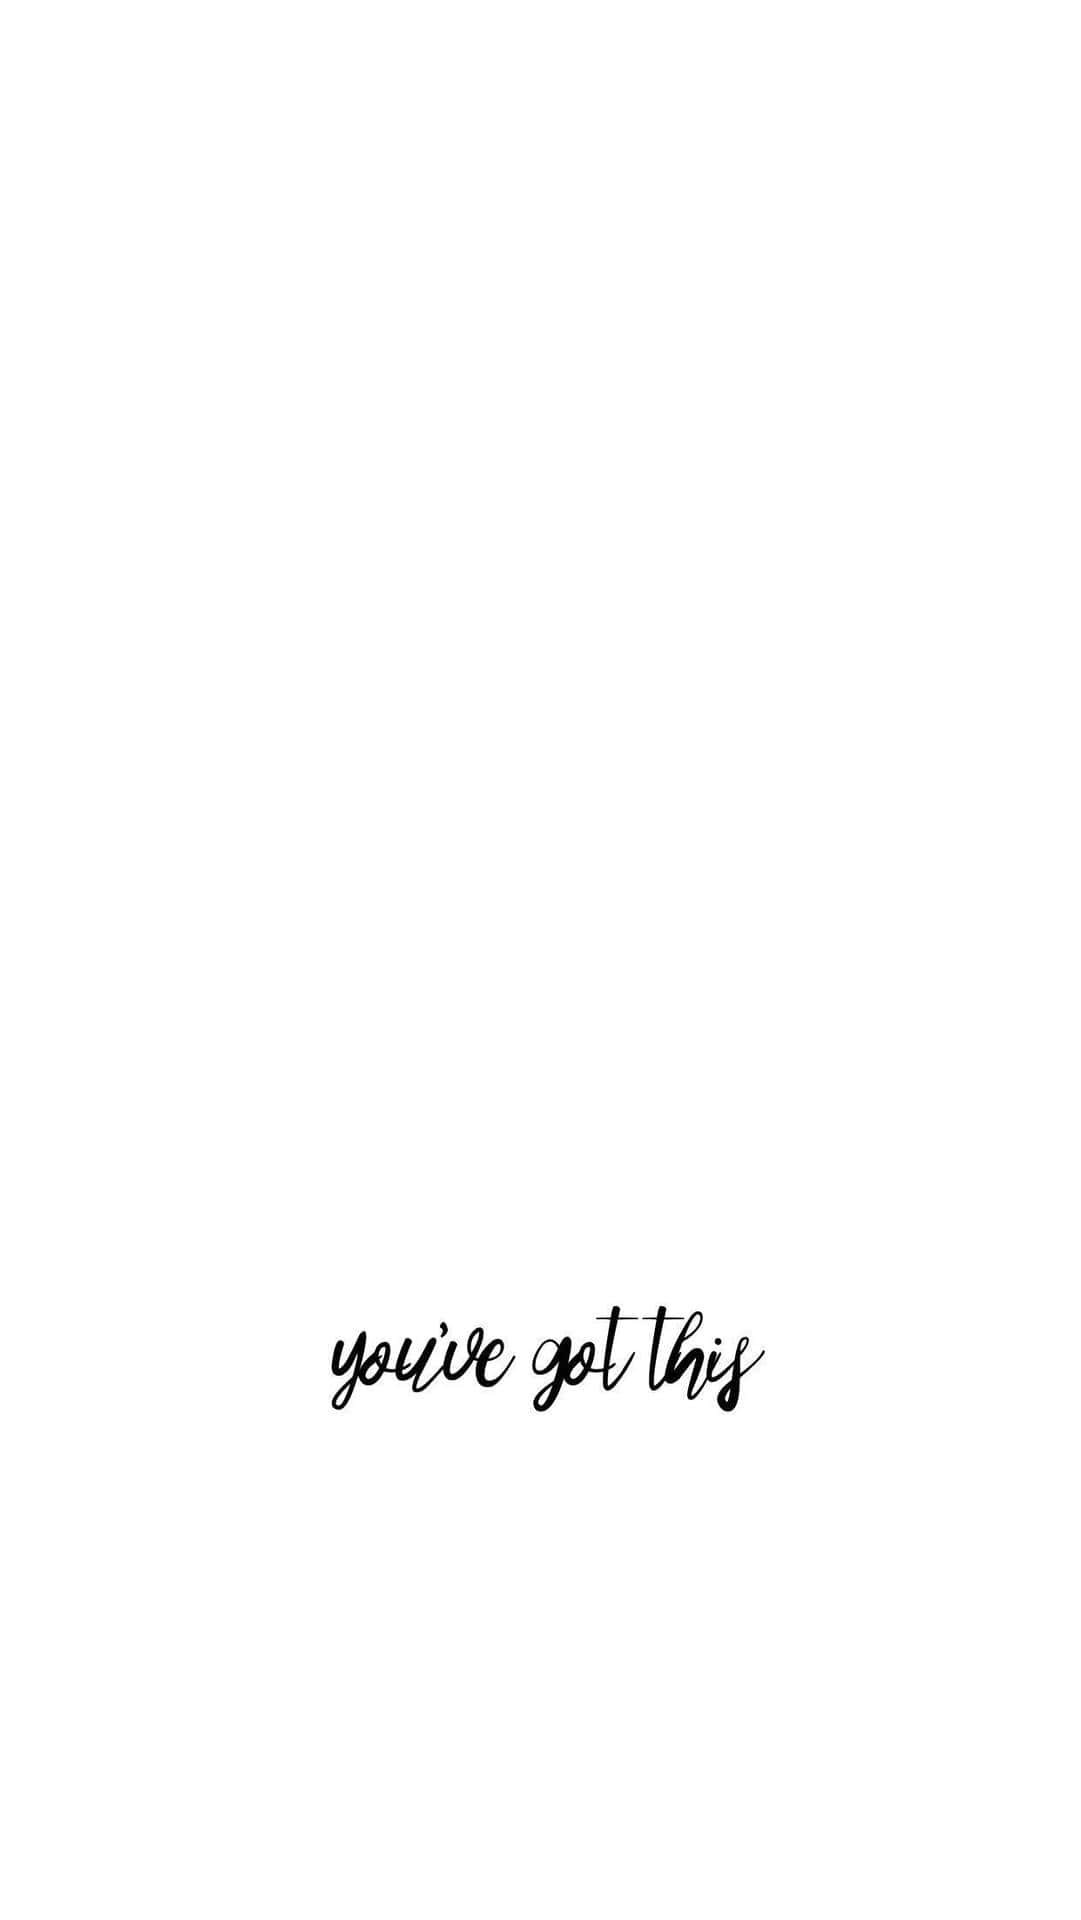 Youve Got This_ Inspirational Quote Wallpaper